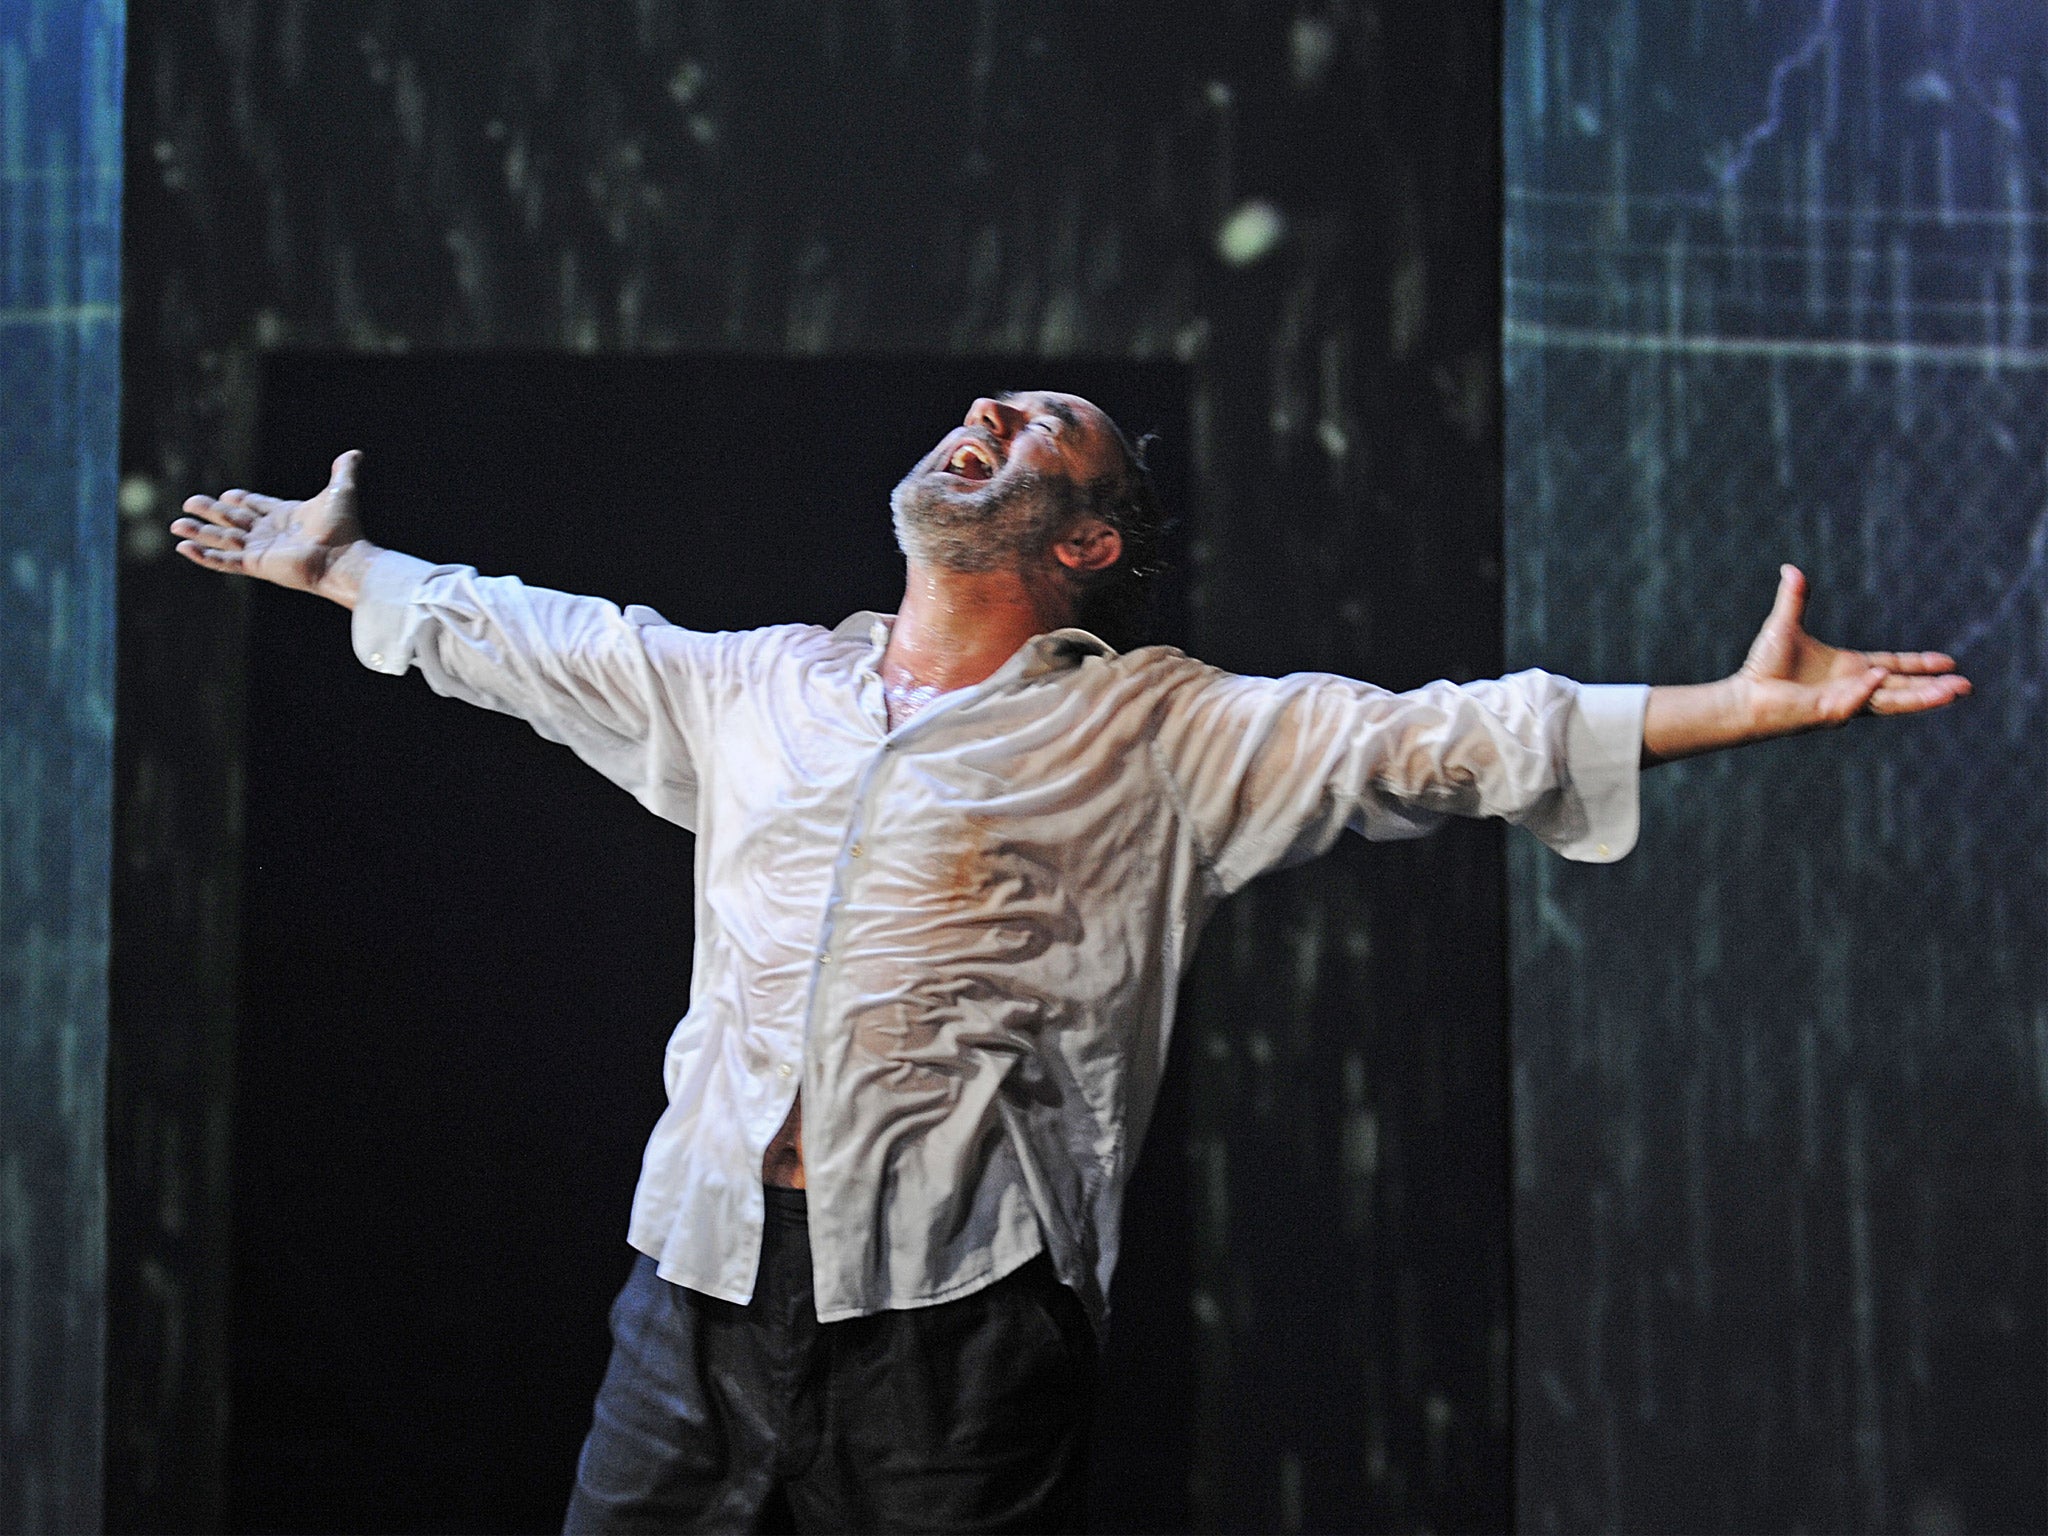 David Haig in the title role of King Lear at Bath Theatre Royal